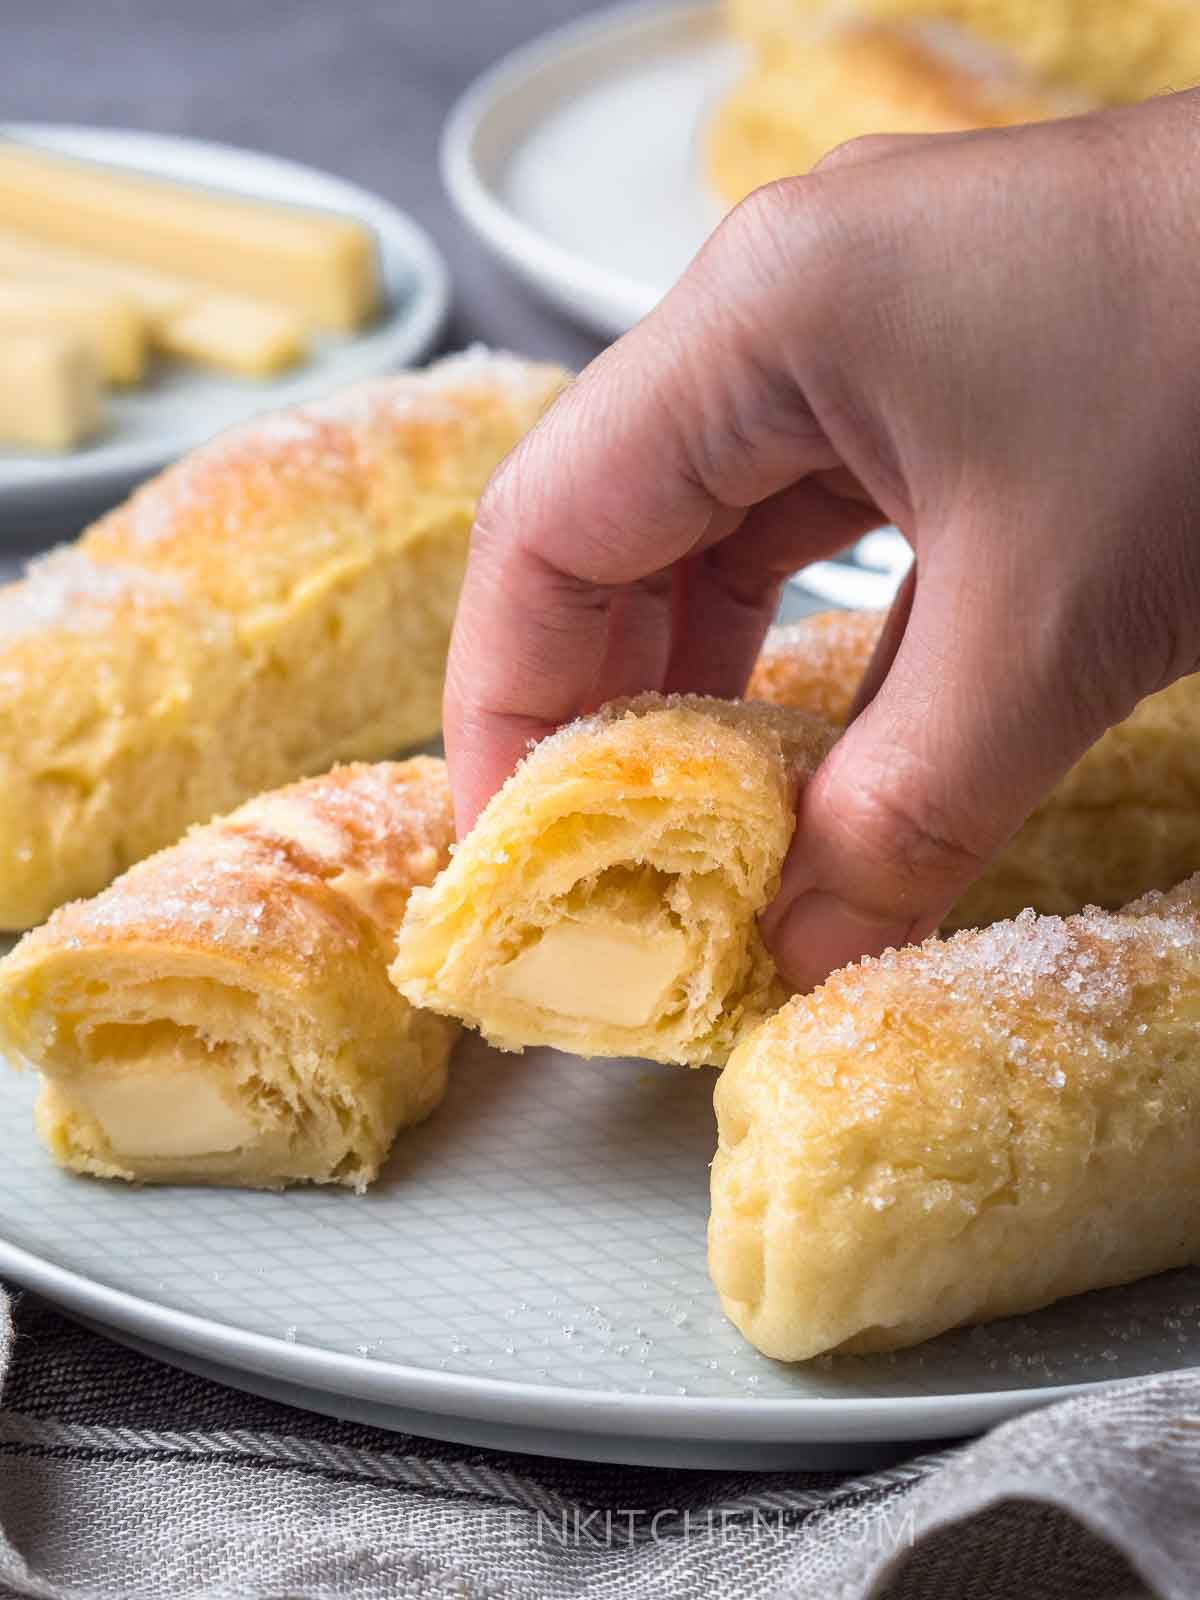 bread rolls filled with cheese